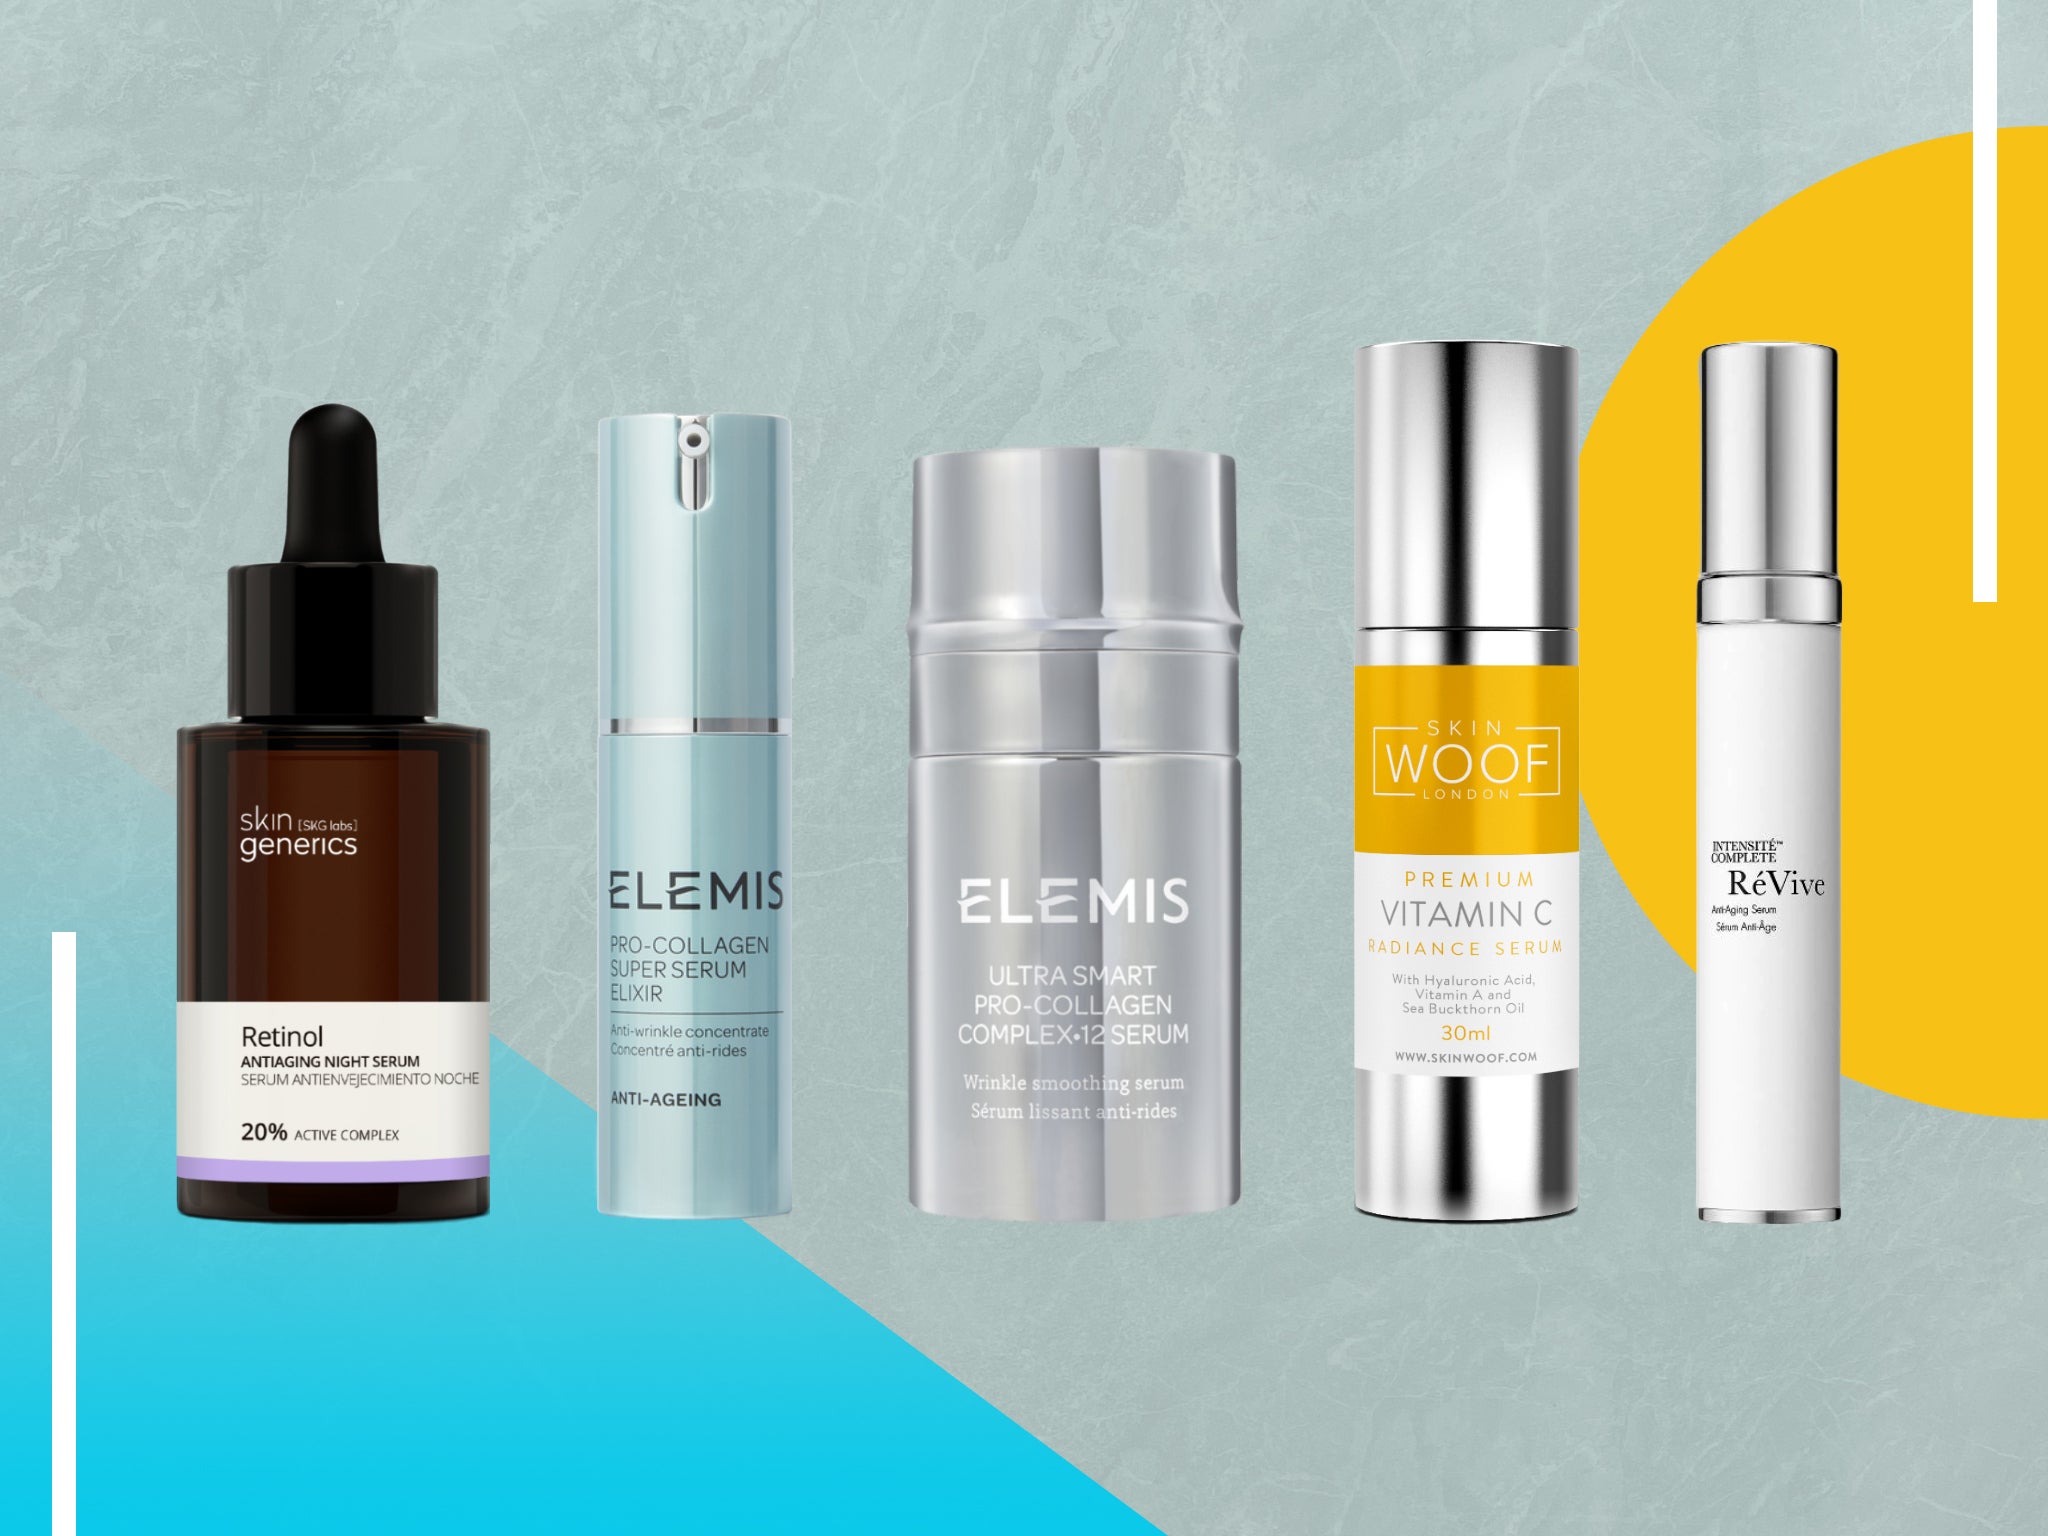 https://static.independent.co.uk/2021/04/08/17/Anti%20ageing%20serums%20indybest.jpg